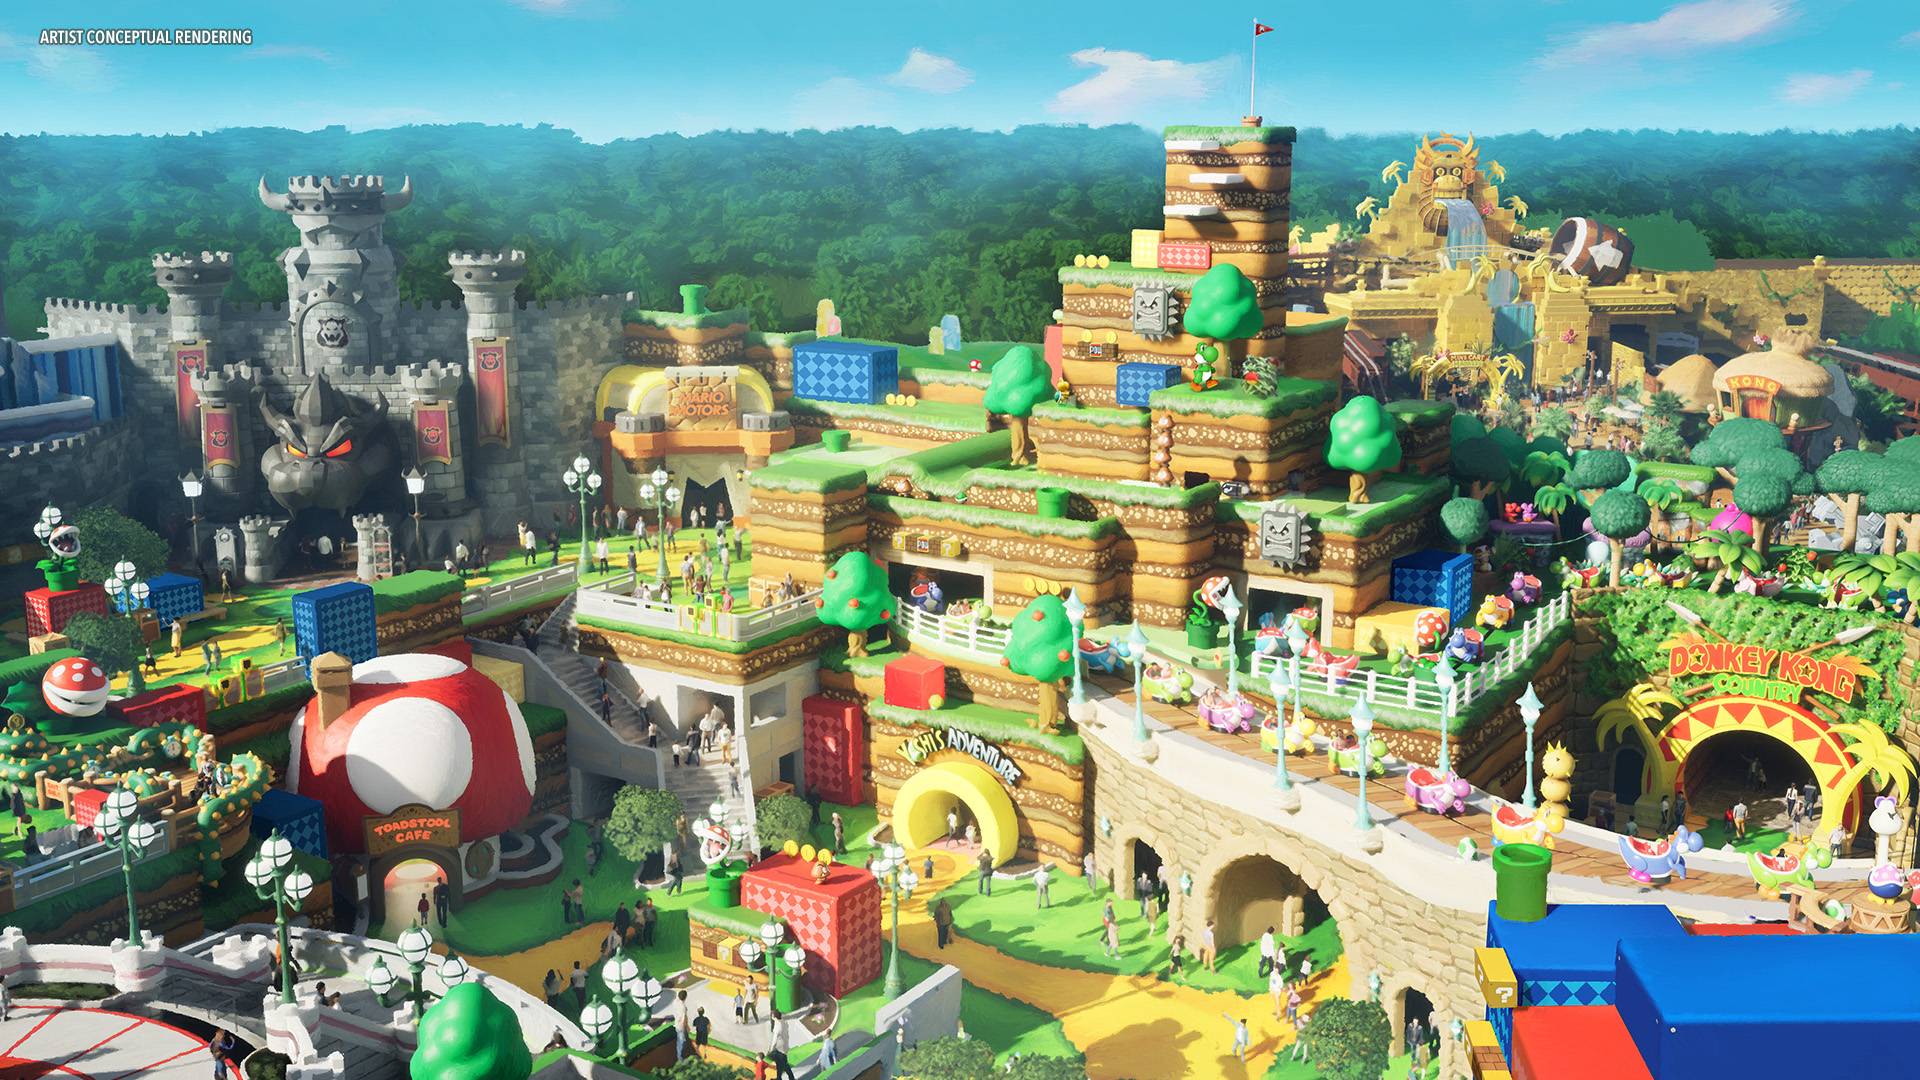 Universal's Epic Universe to debut SUPER NINTENDO WORLD with iconic Nintendo games